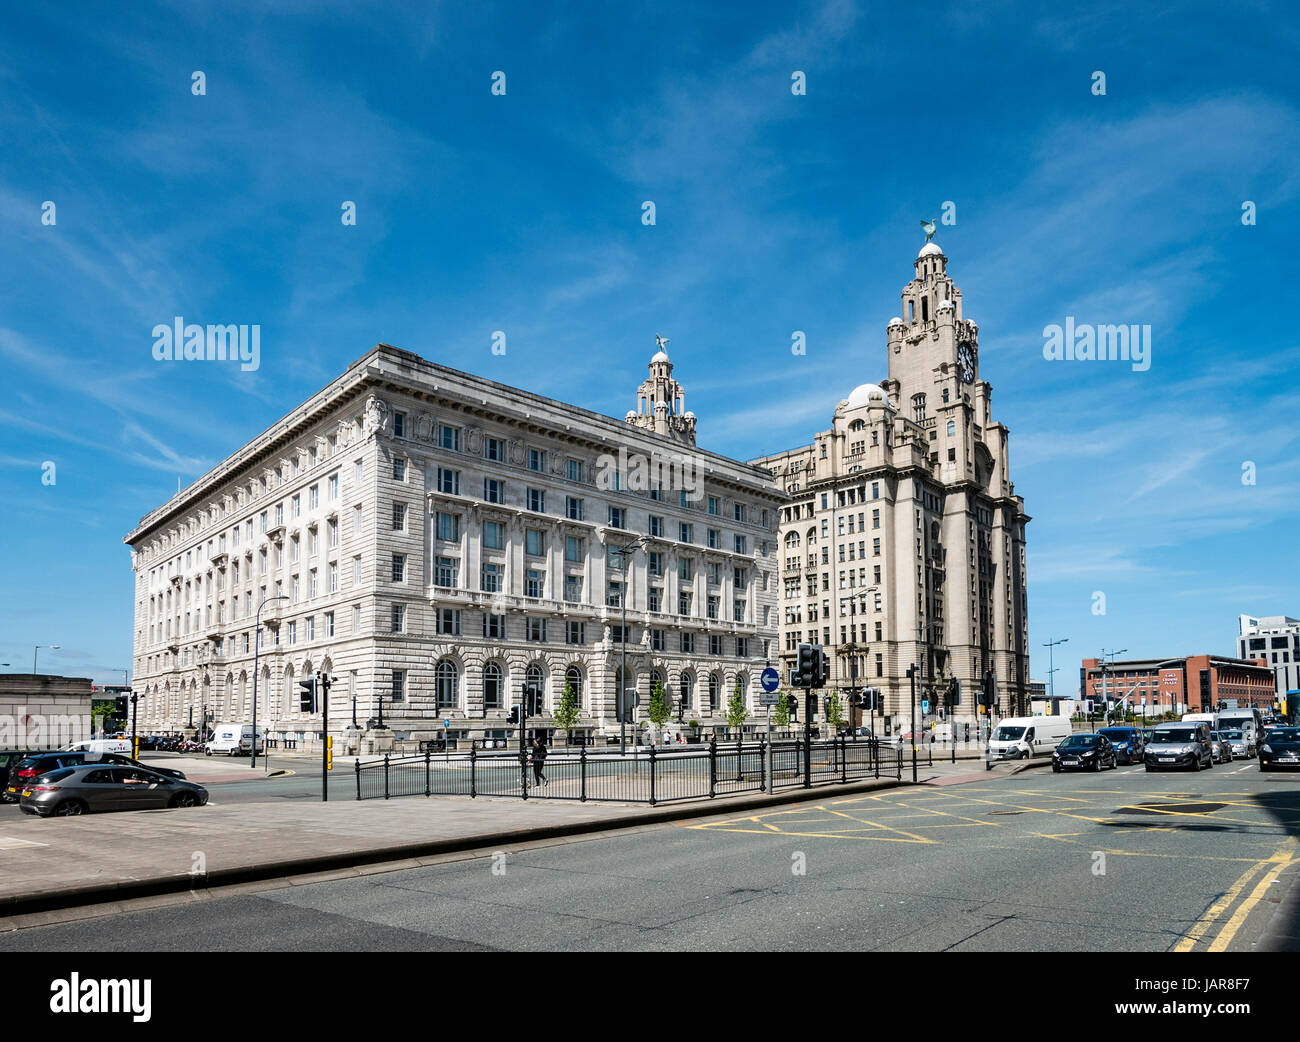 The Royal Liver Building 1911 and Cunard Building 1916 Pier Head Liverpool UK Stock Photo